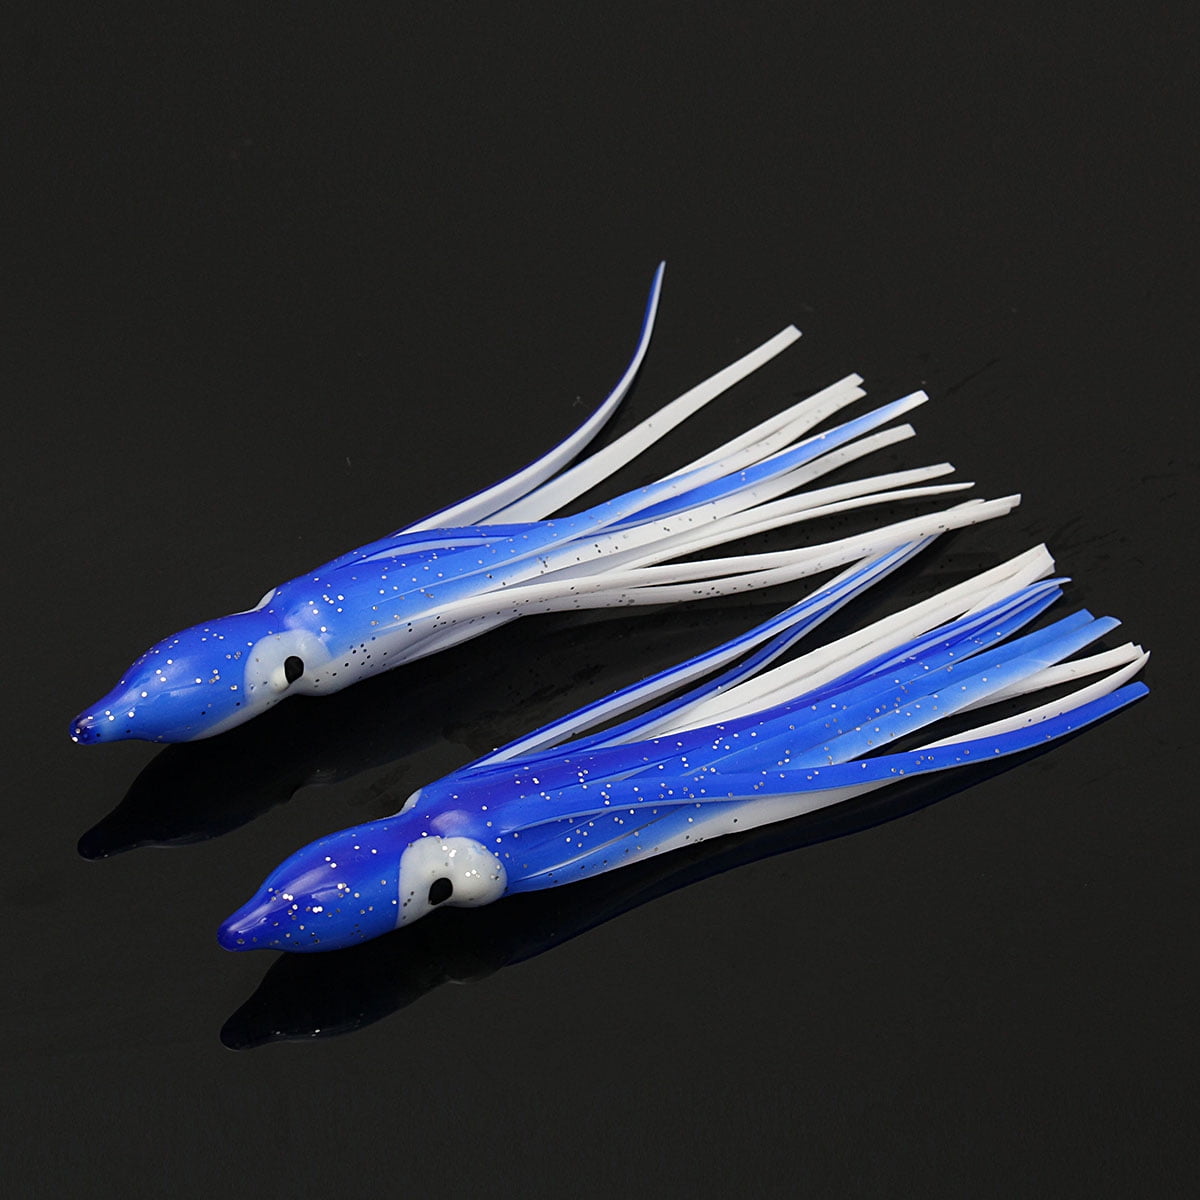 Vaycally Squidy Soft Lure Octopus Skirt Soft Plastic Bait Bass Salmon Pike Walleye PerchTrolling Fishing Lure Tackle 9.5cm/3.74inch Fishing Lures Spinners Baits Spoon 